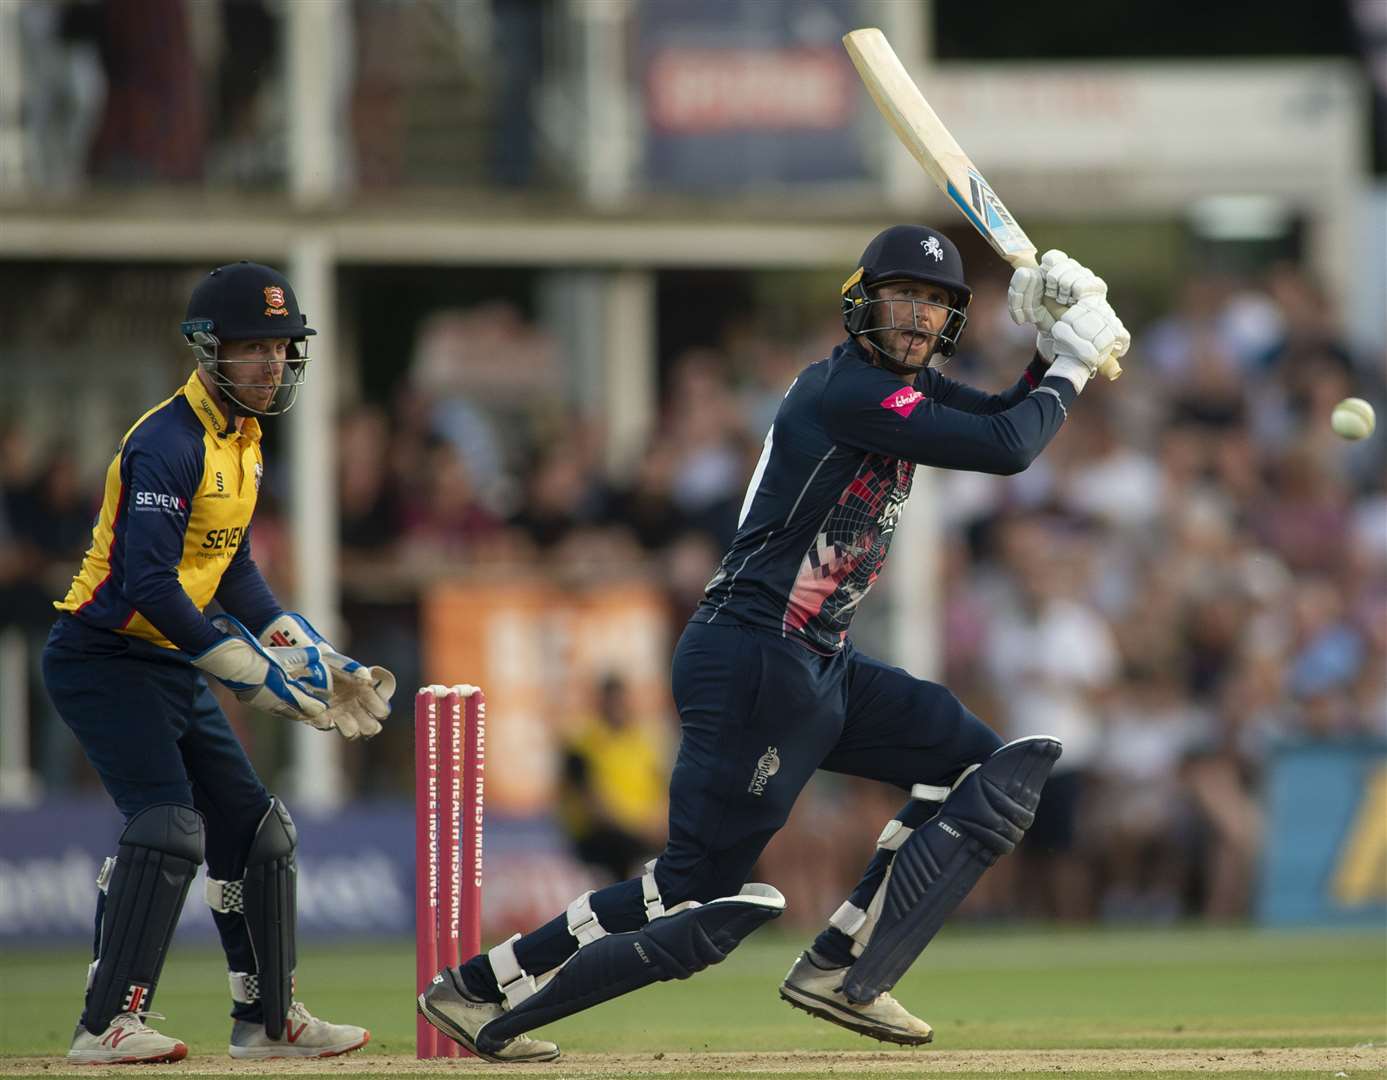 Spitfires' Alex Blake in T20 action against Essex. Picture: Ady Kerry